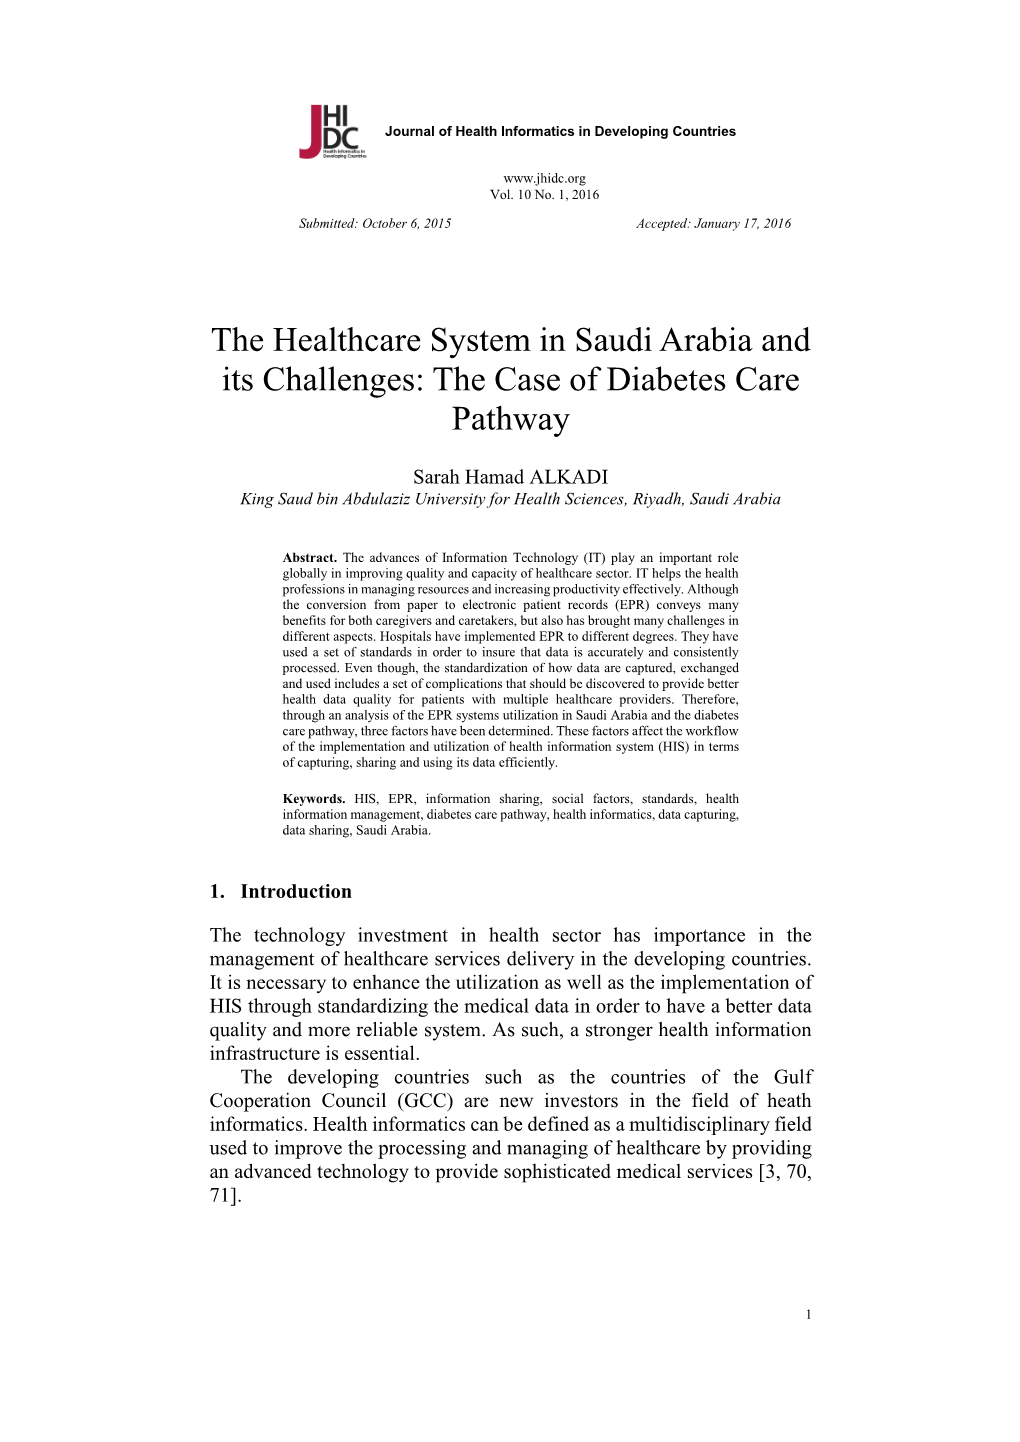 The Healthcare System in Saudi Arabia and Its Challenges: the Case of Diabetes Care Pathway